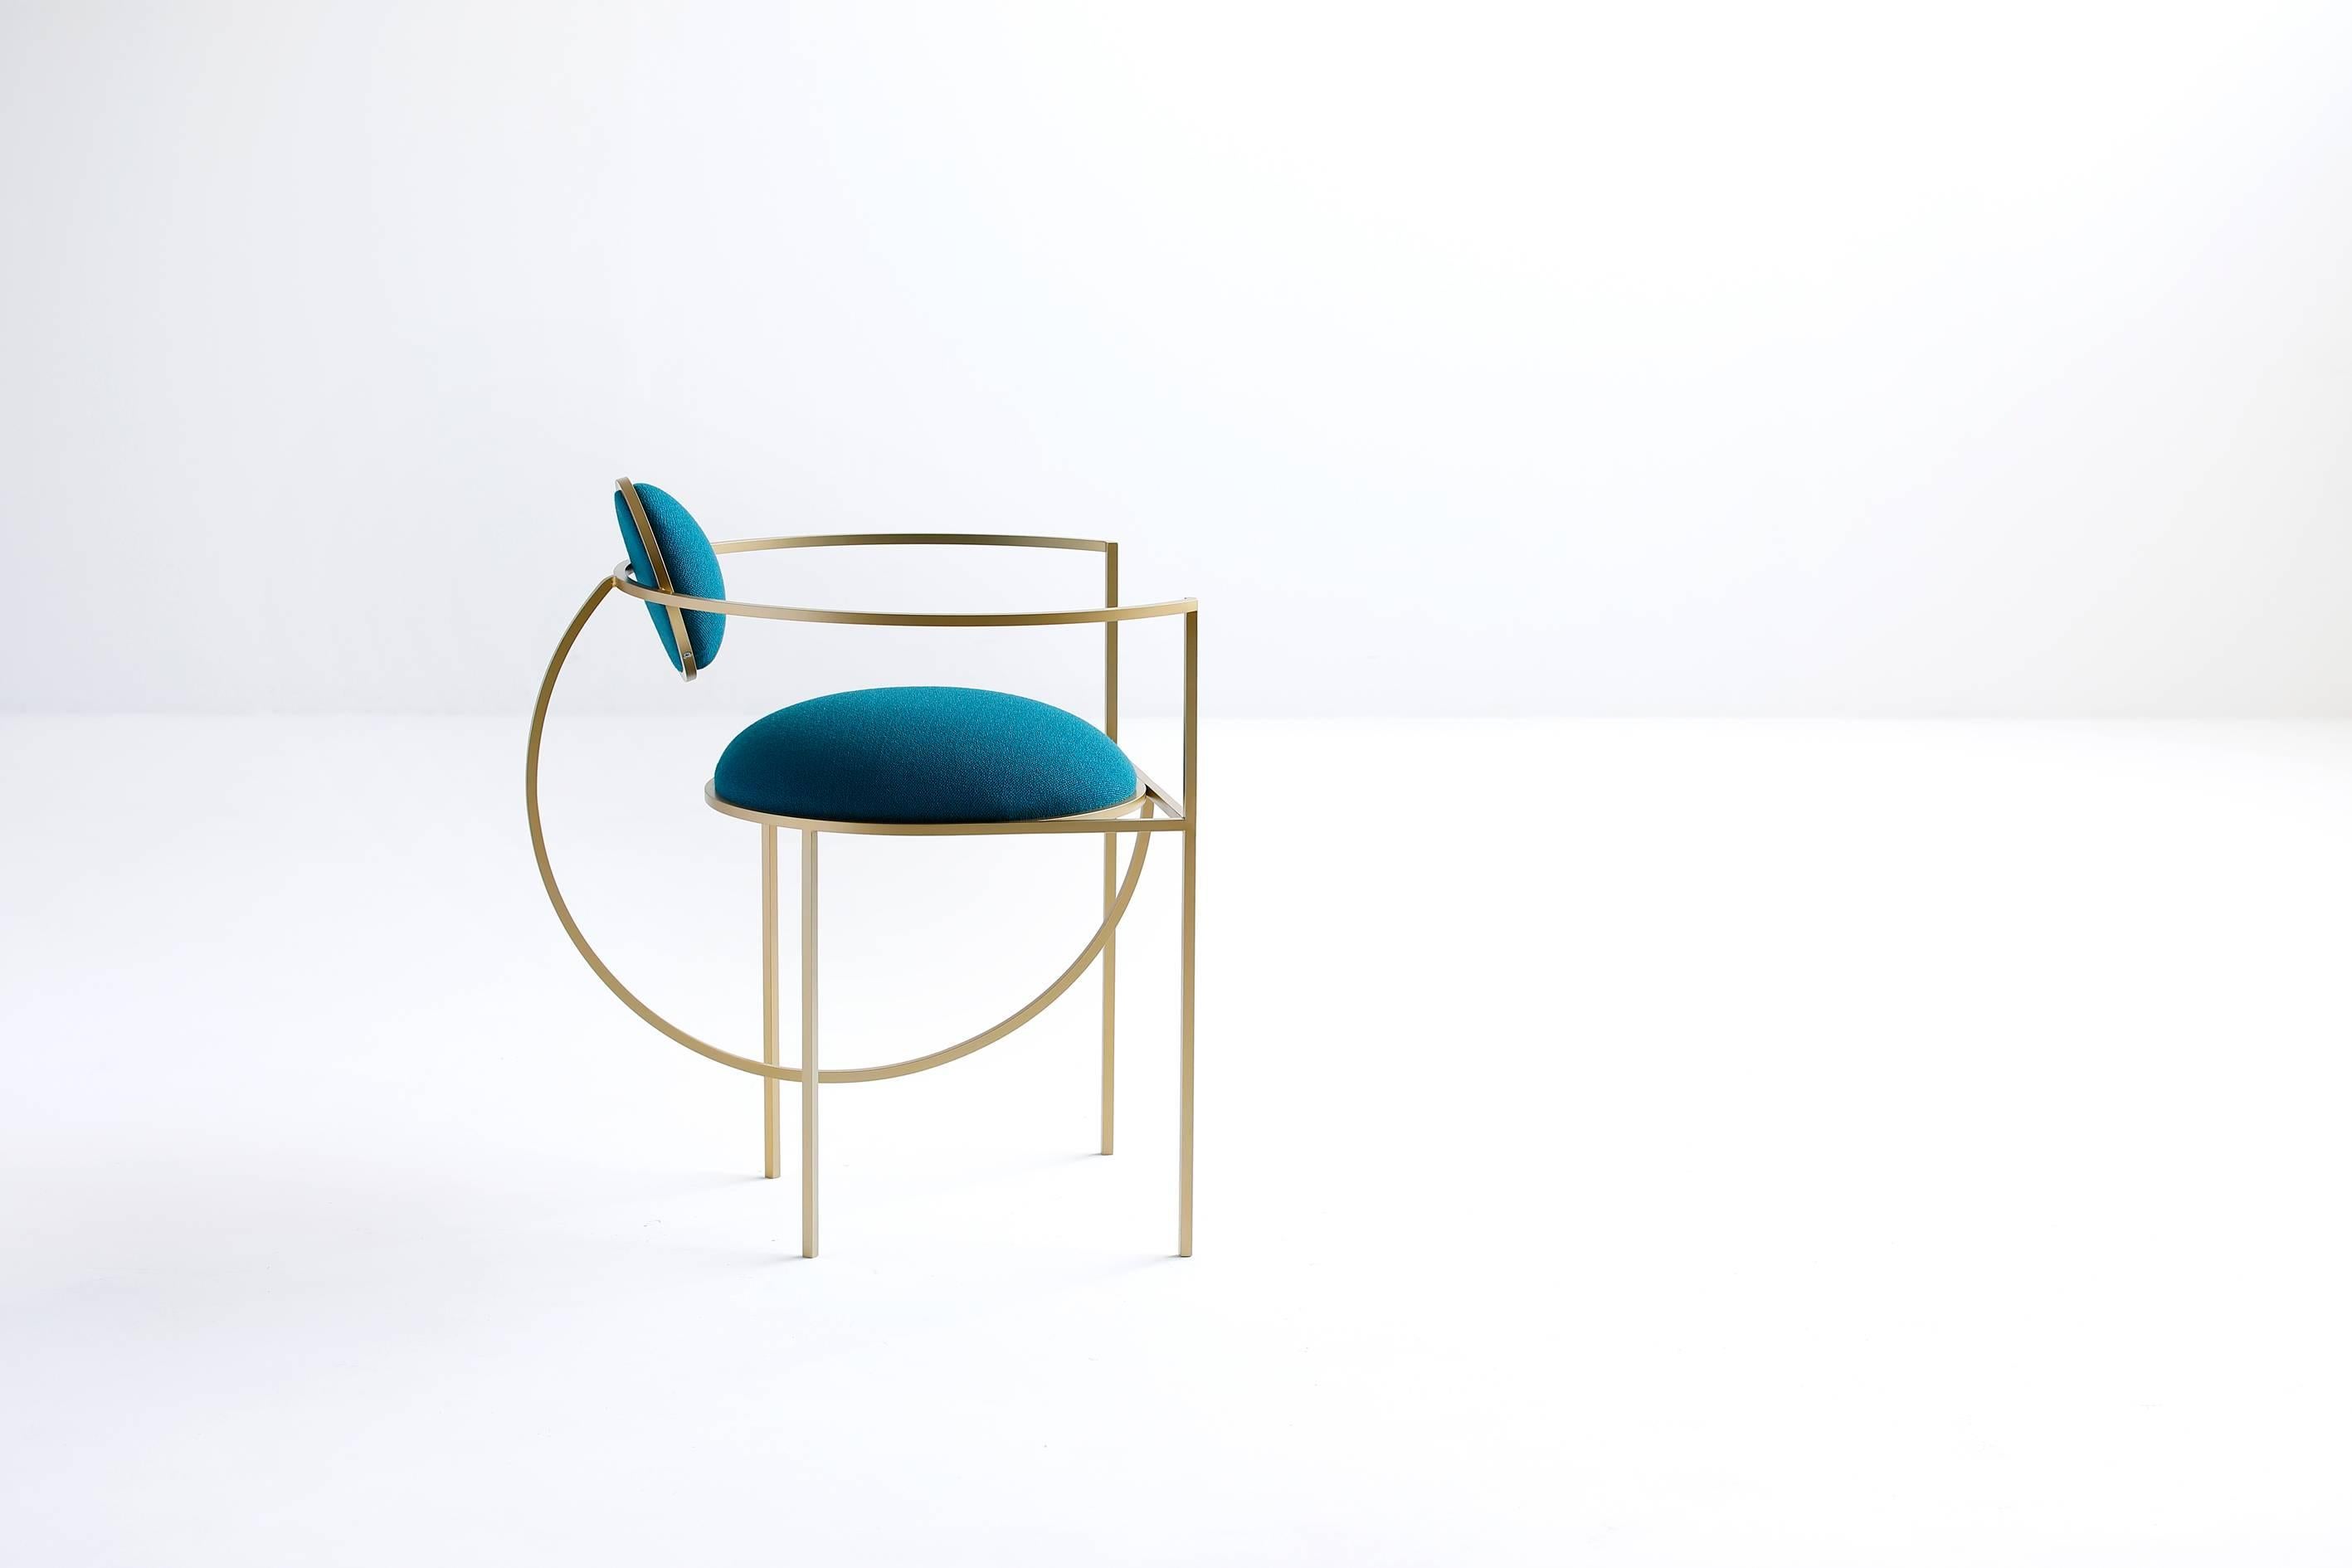 This is the first time that Bohinc explores a design favorite; the chair, produced by Matter of Stuff. 

In the collection, Lara Bohinc develops her stellar themes, finding inspiration in planetary and lunar orbits, whose curved trajectories drive